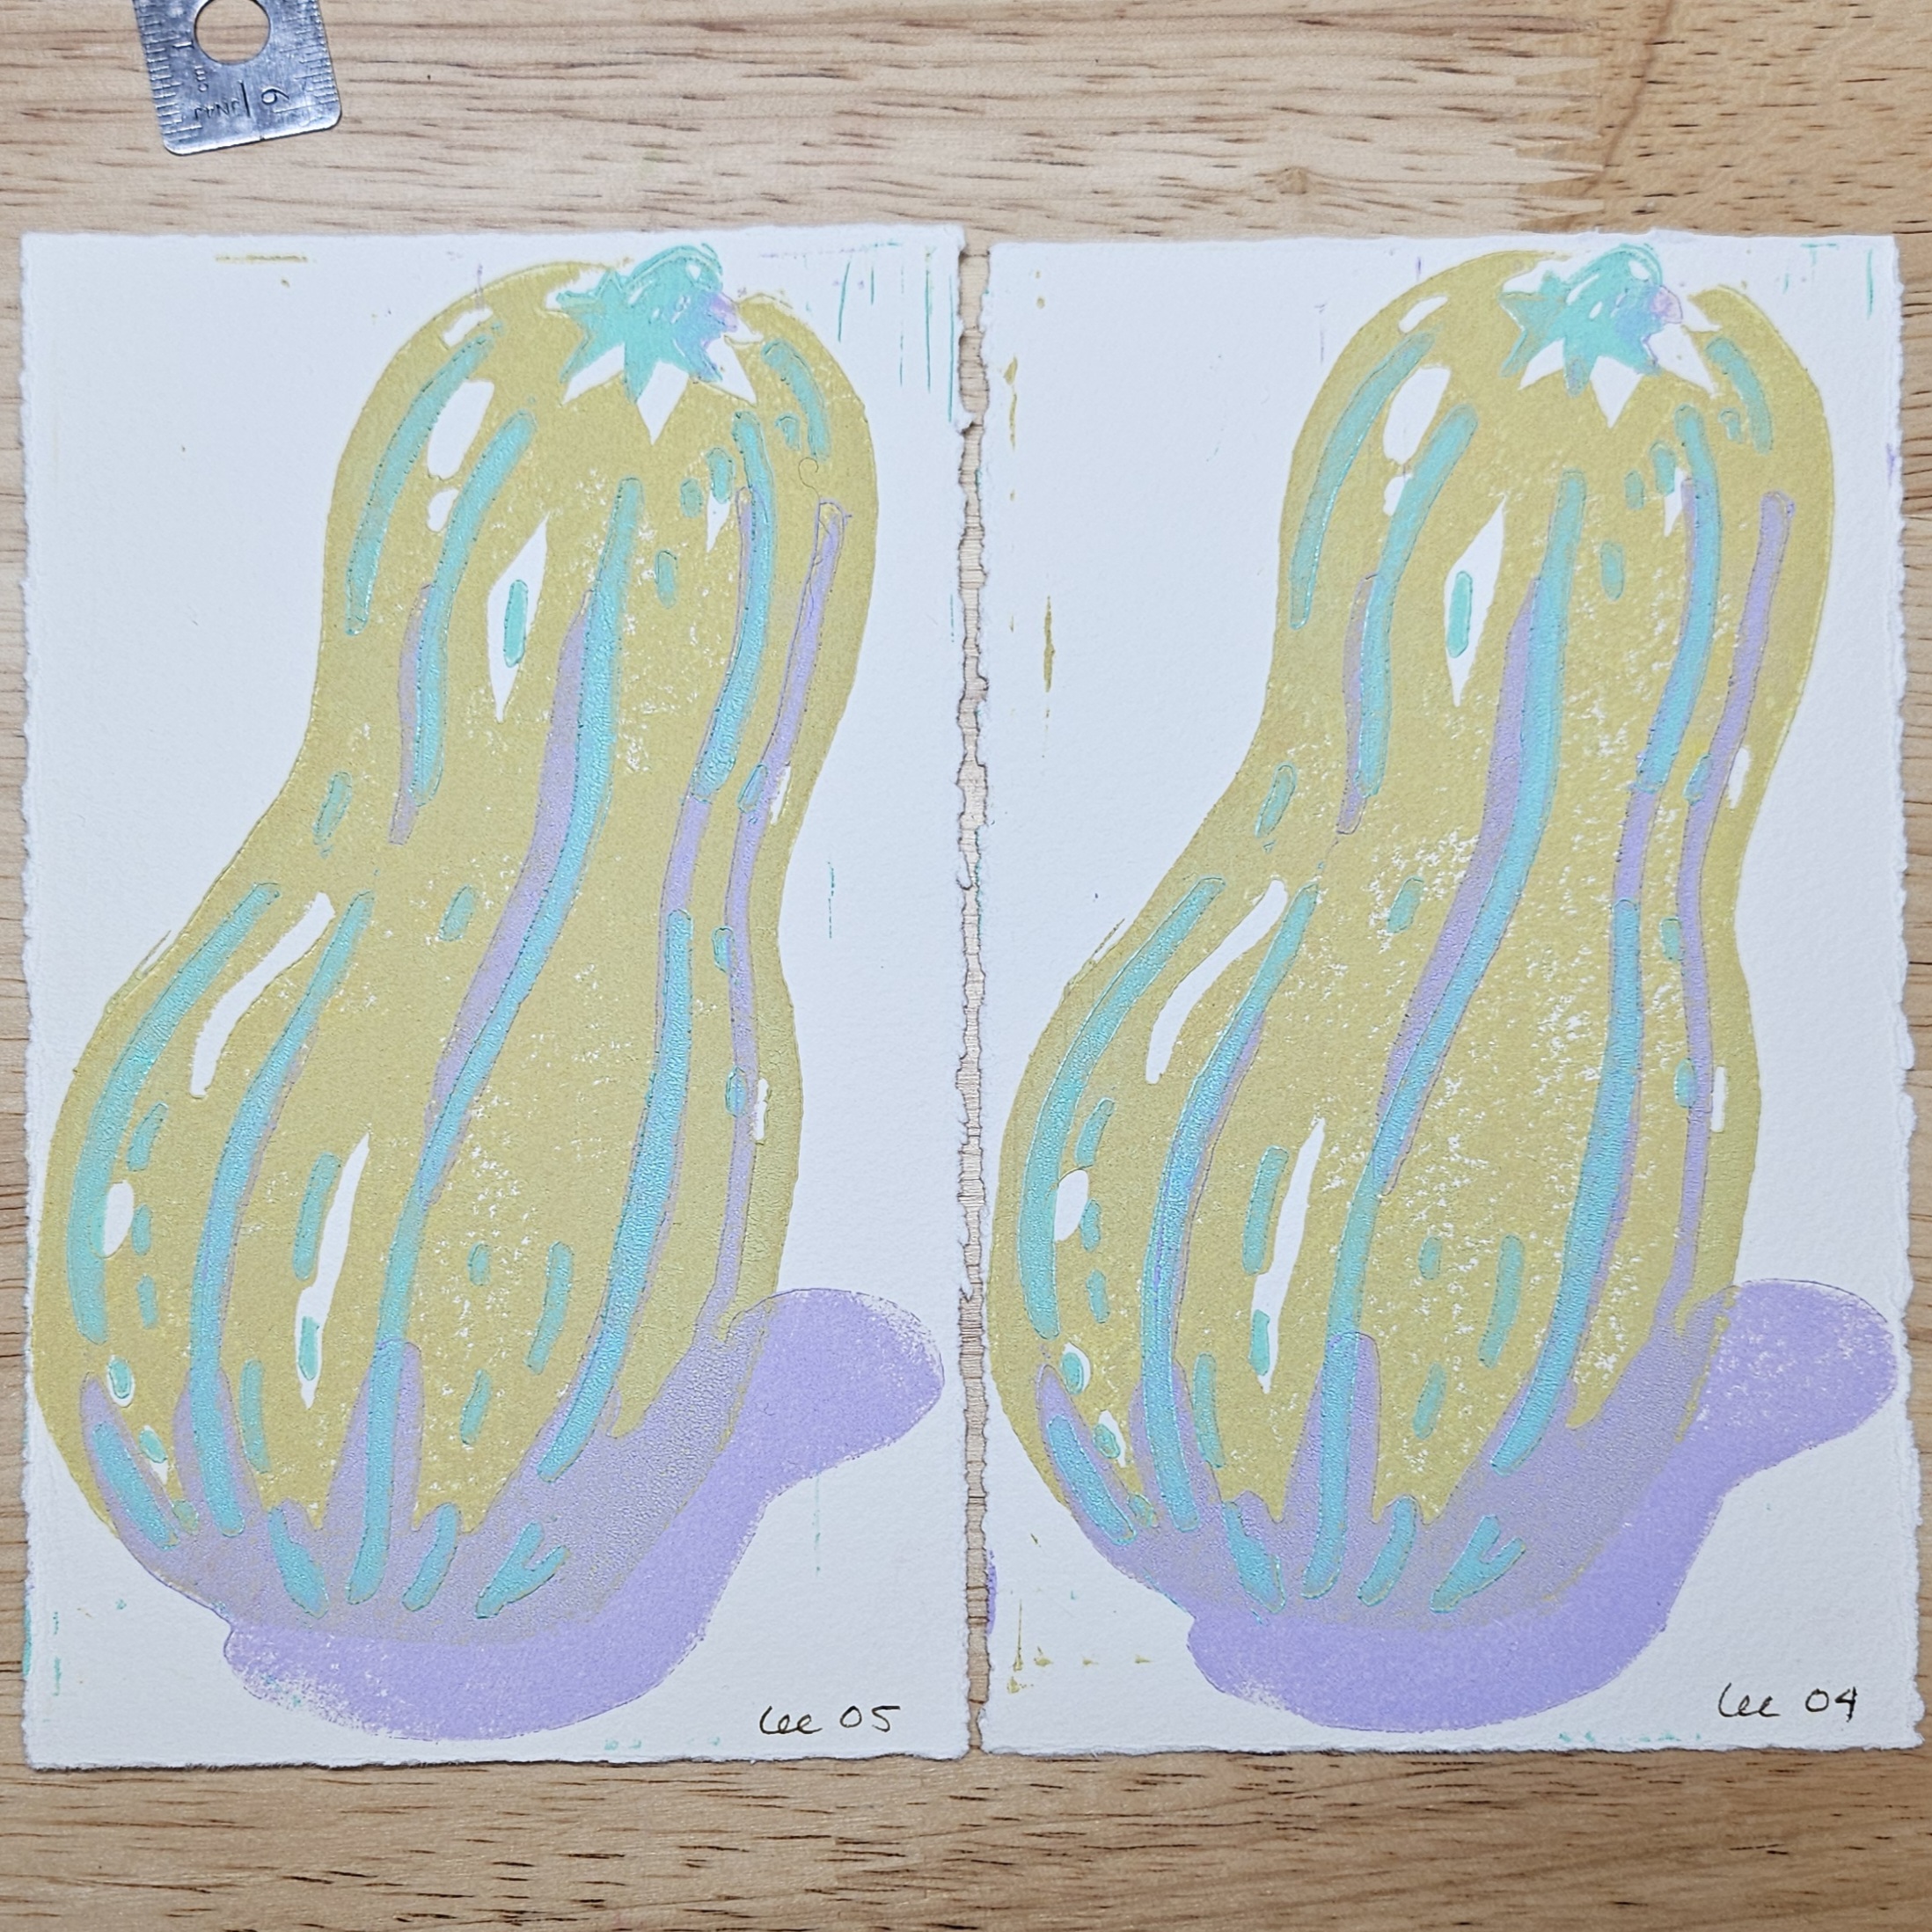 Two identical prints of a delicata squash. The body of the squash is cornsilk (muted yellow), the stem and stripes in mint green, and the shadows in lilac.